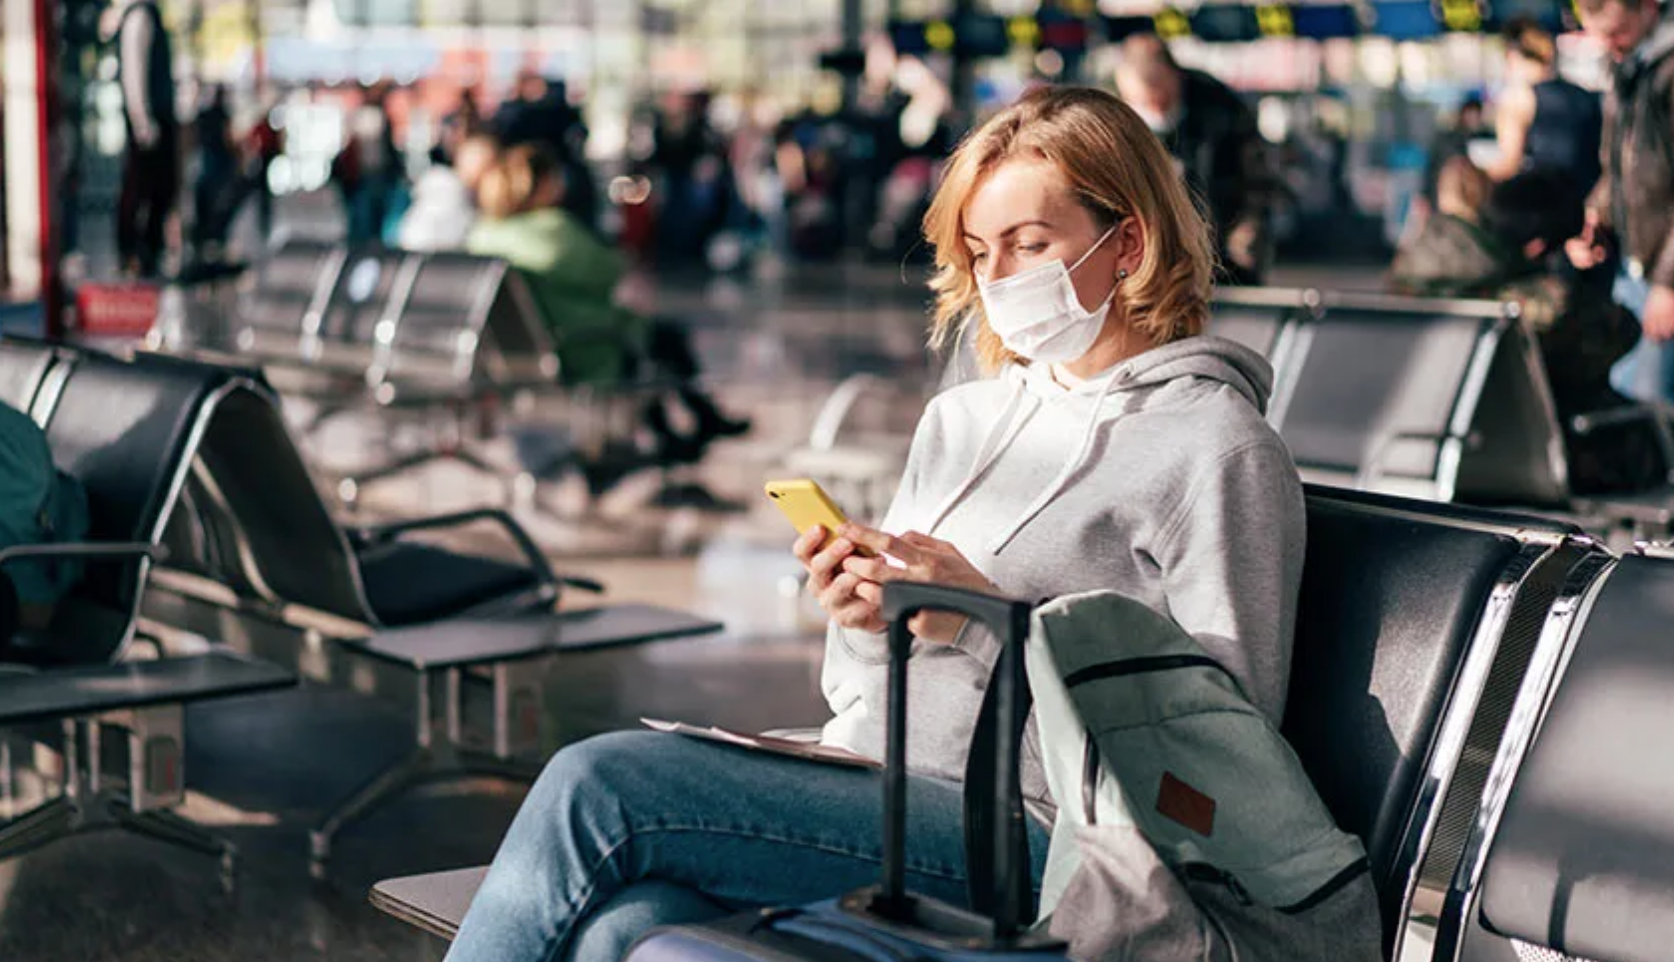 woman sitting at airport wearing a mask